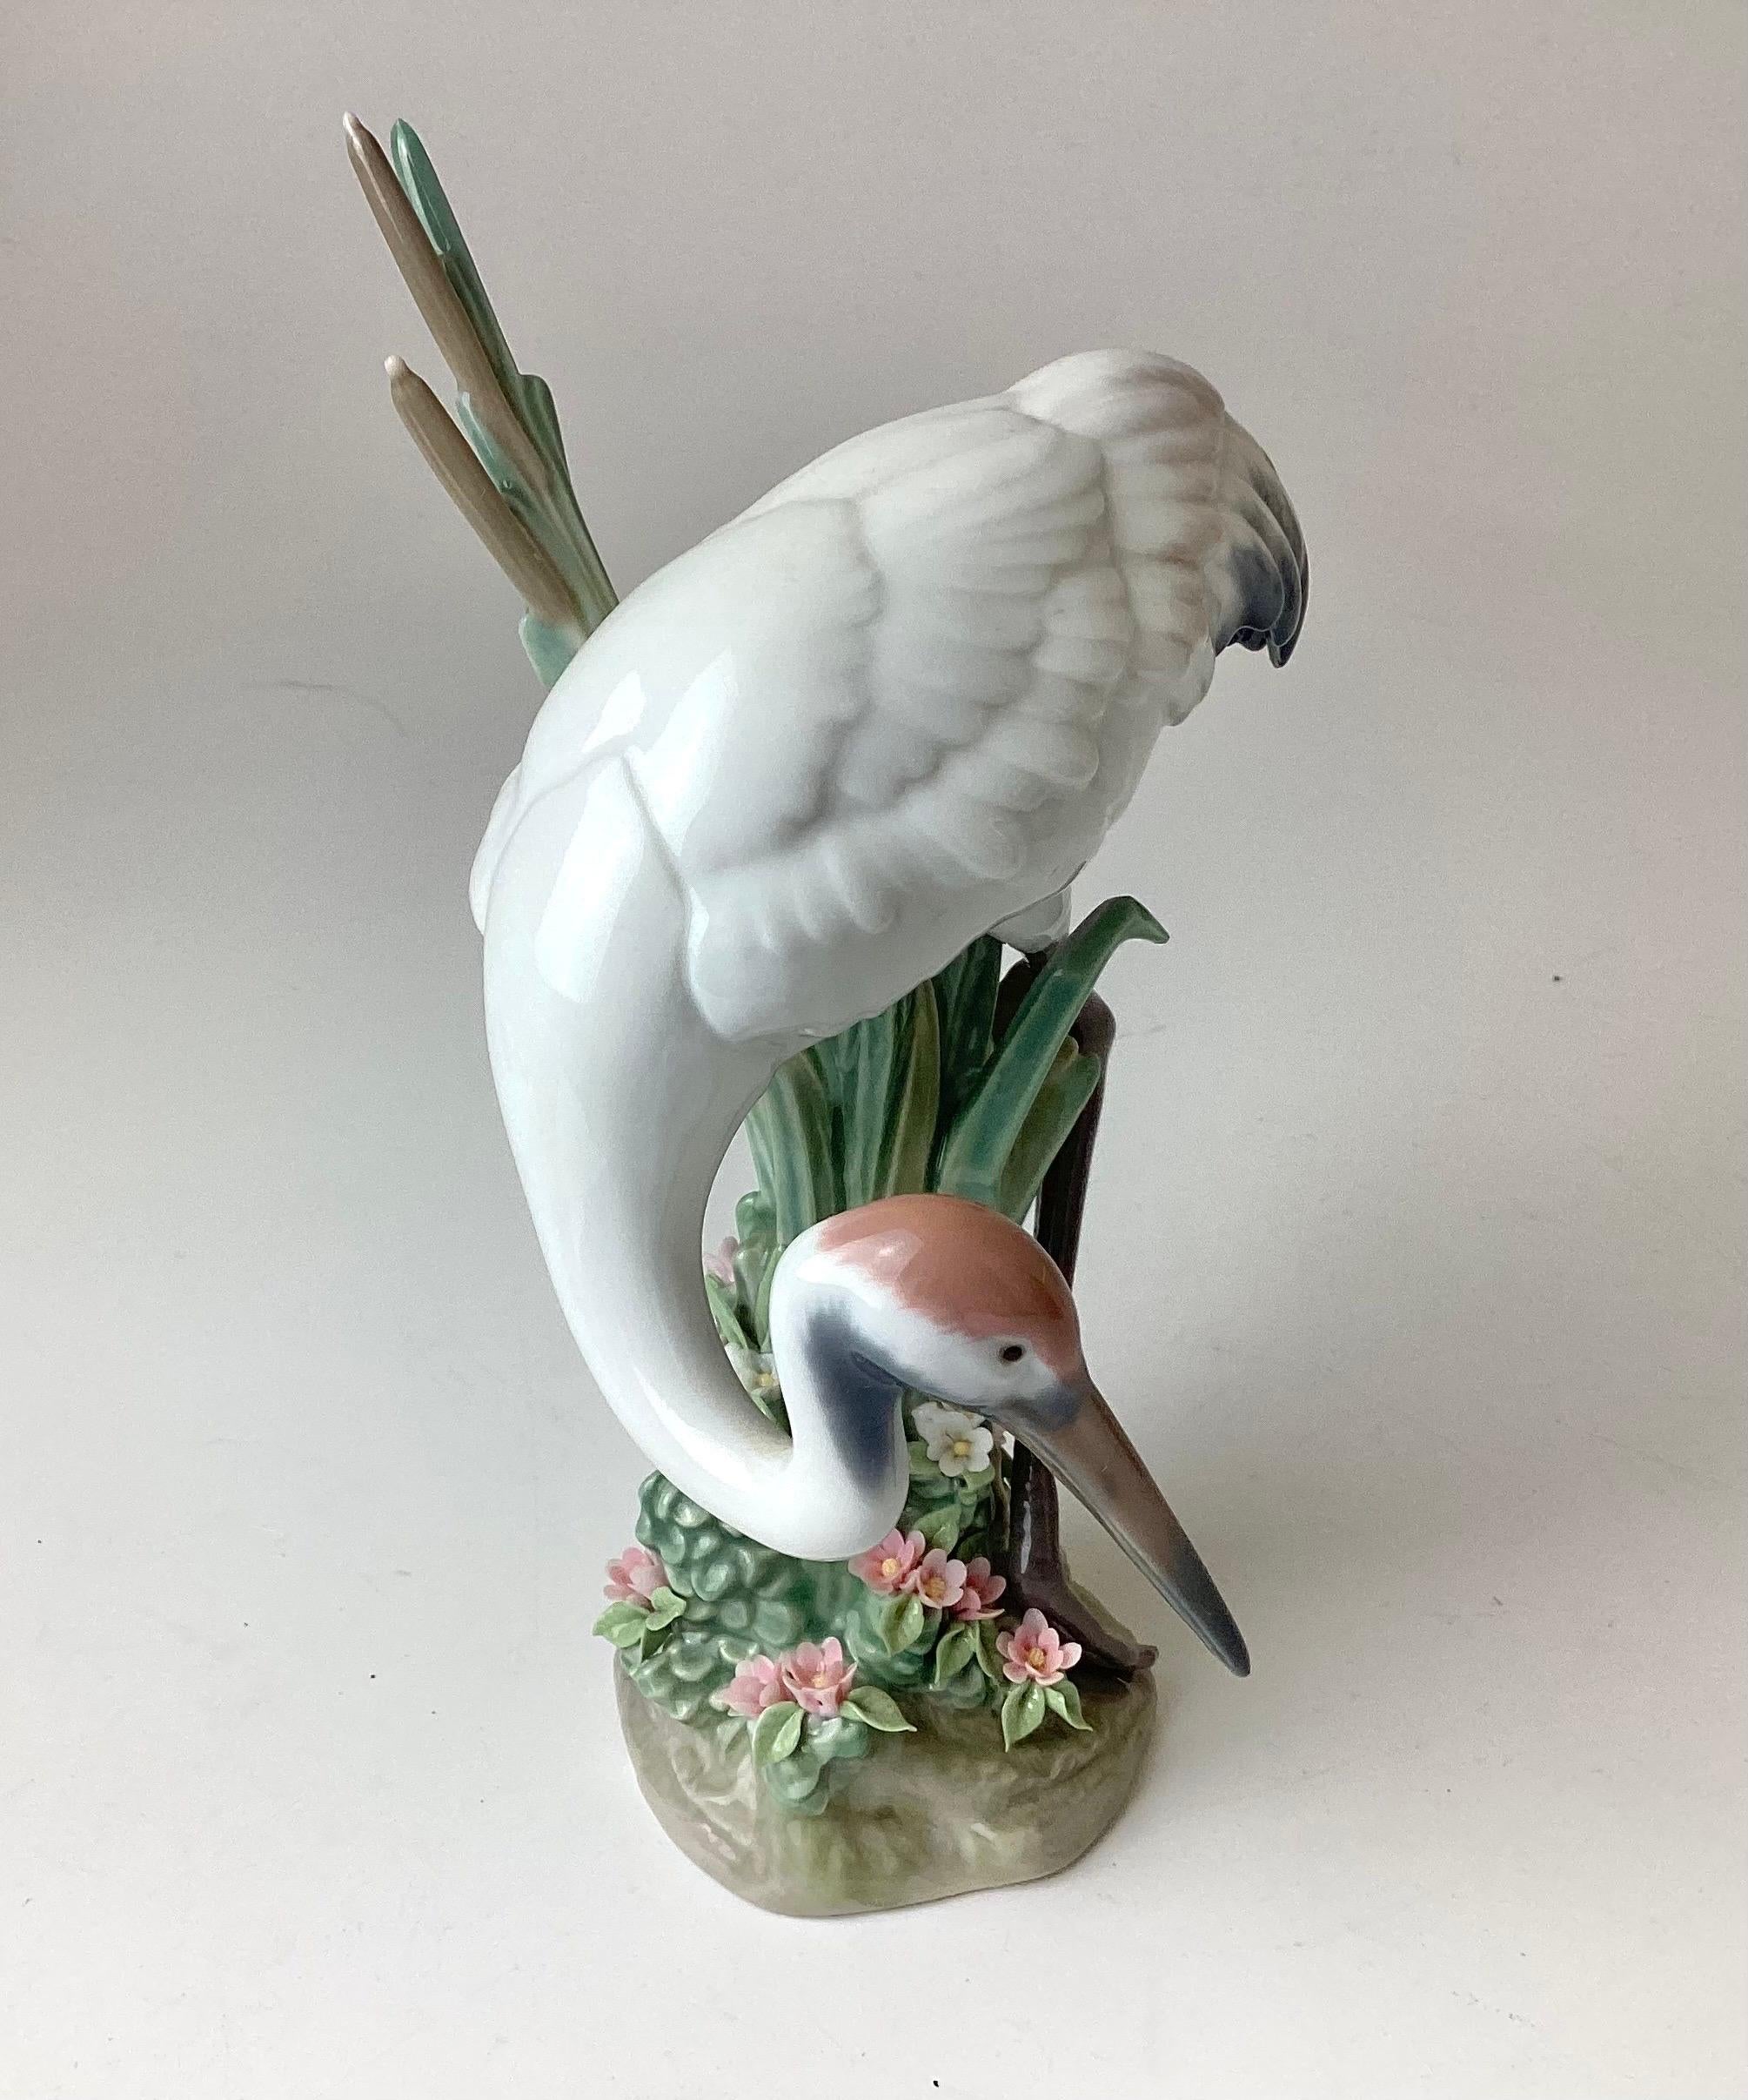 Lladro 1613 Bowing Crane. This piece has been discontinued. It is in Wonderfull condition with no chips or cracks.